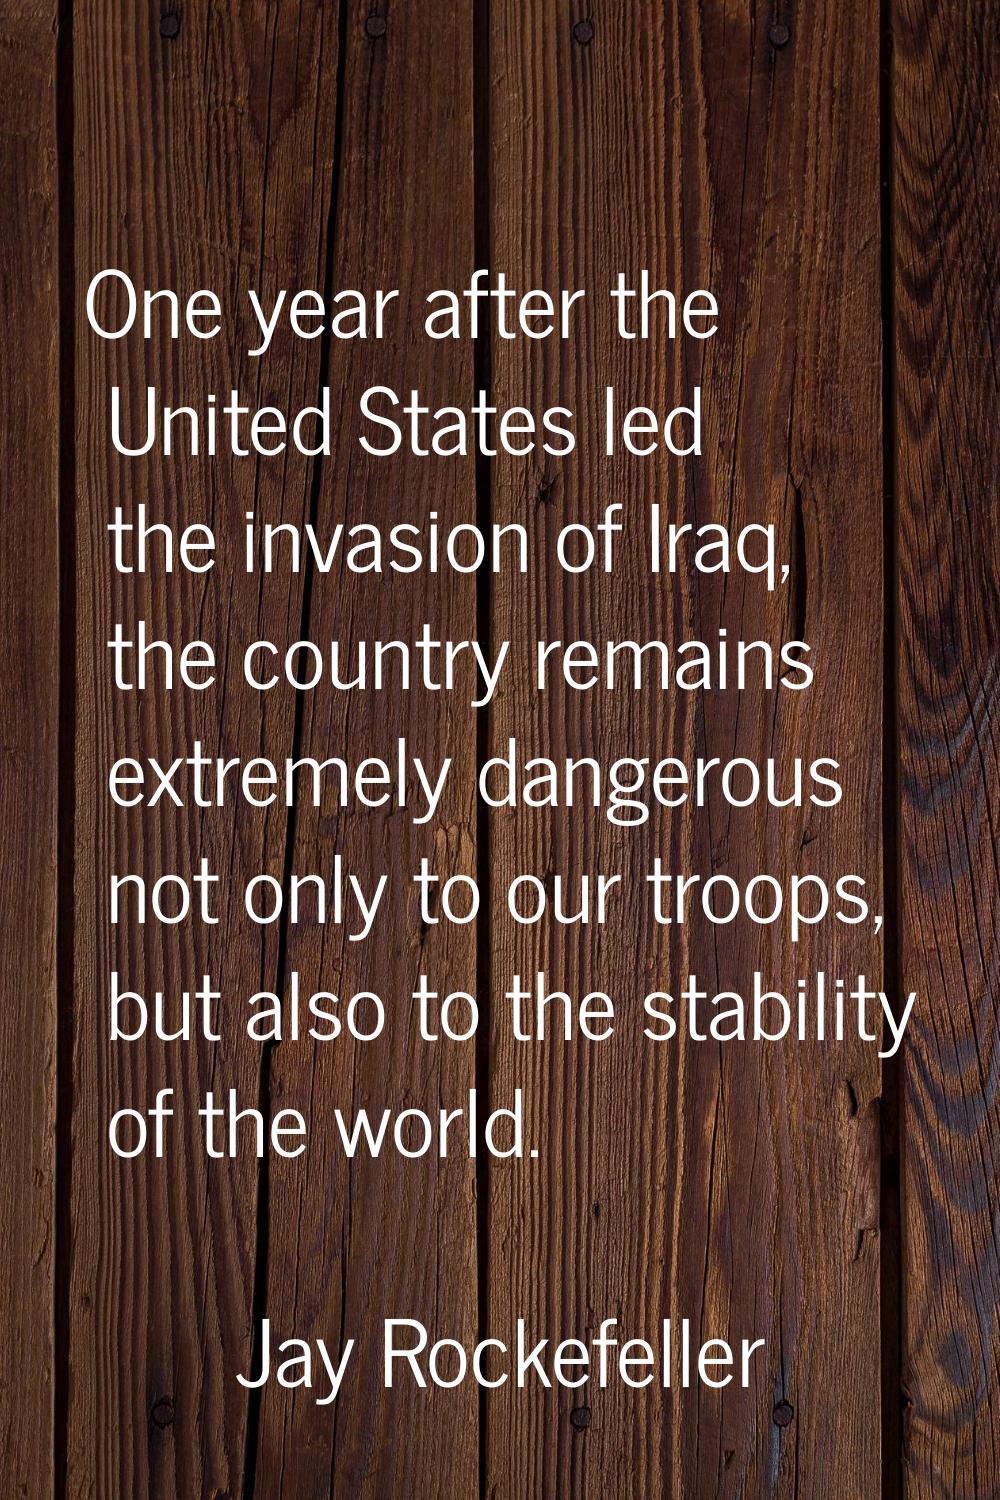 One year after the United States led the invasion of Iraq, the country remains extremely dangerous 